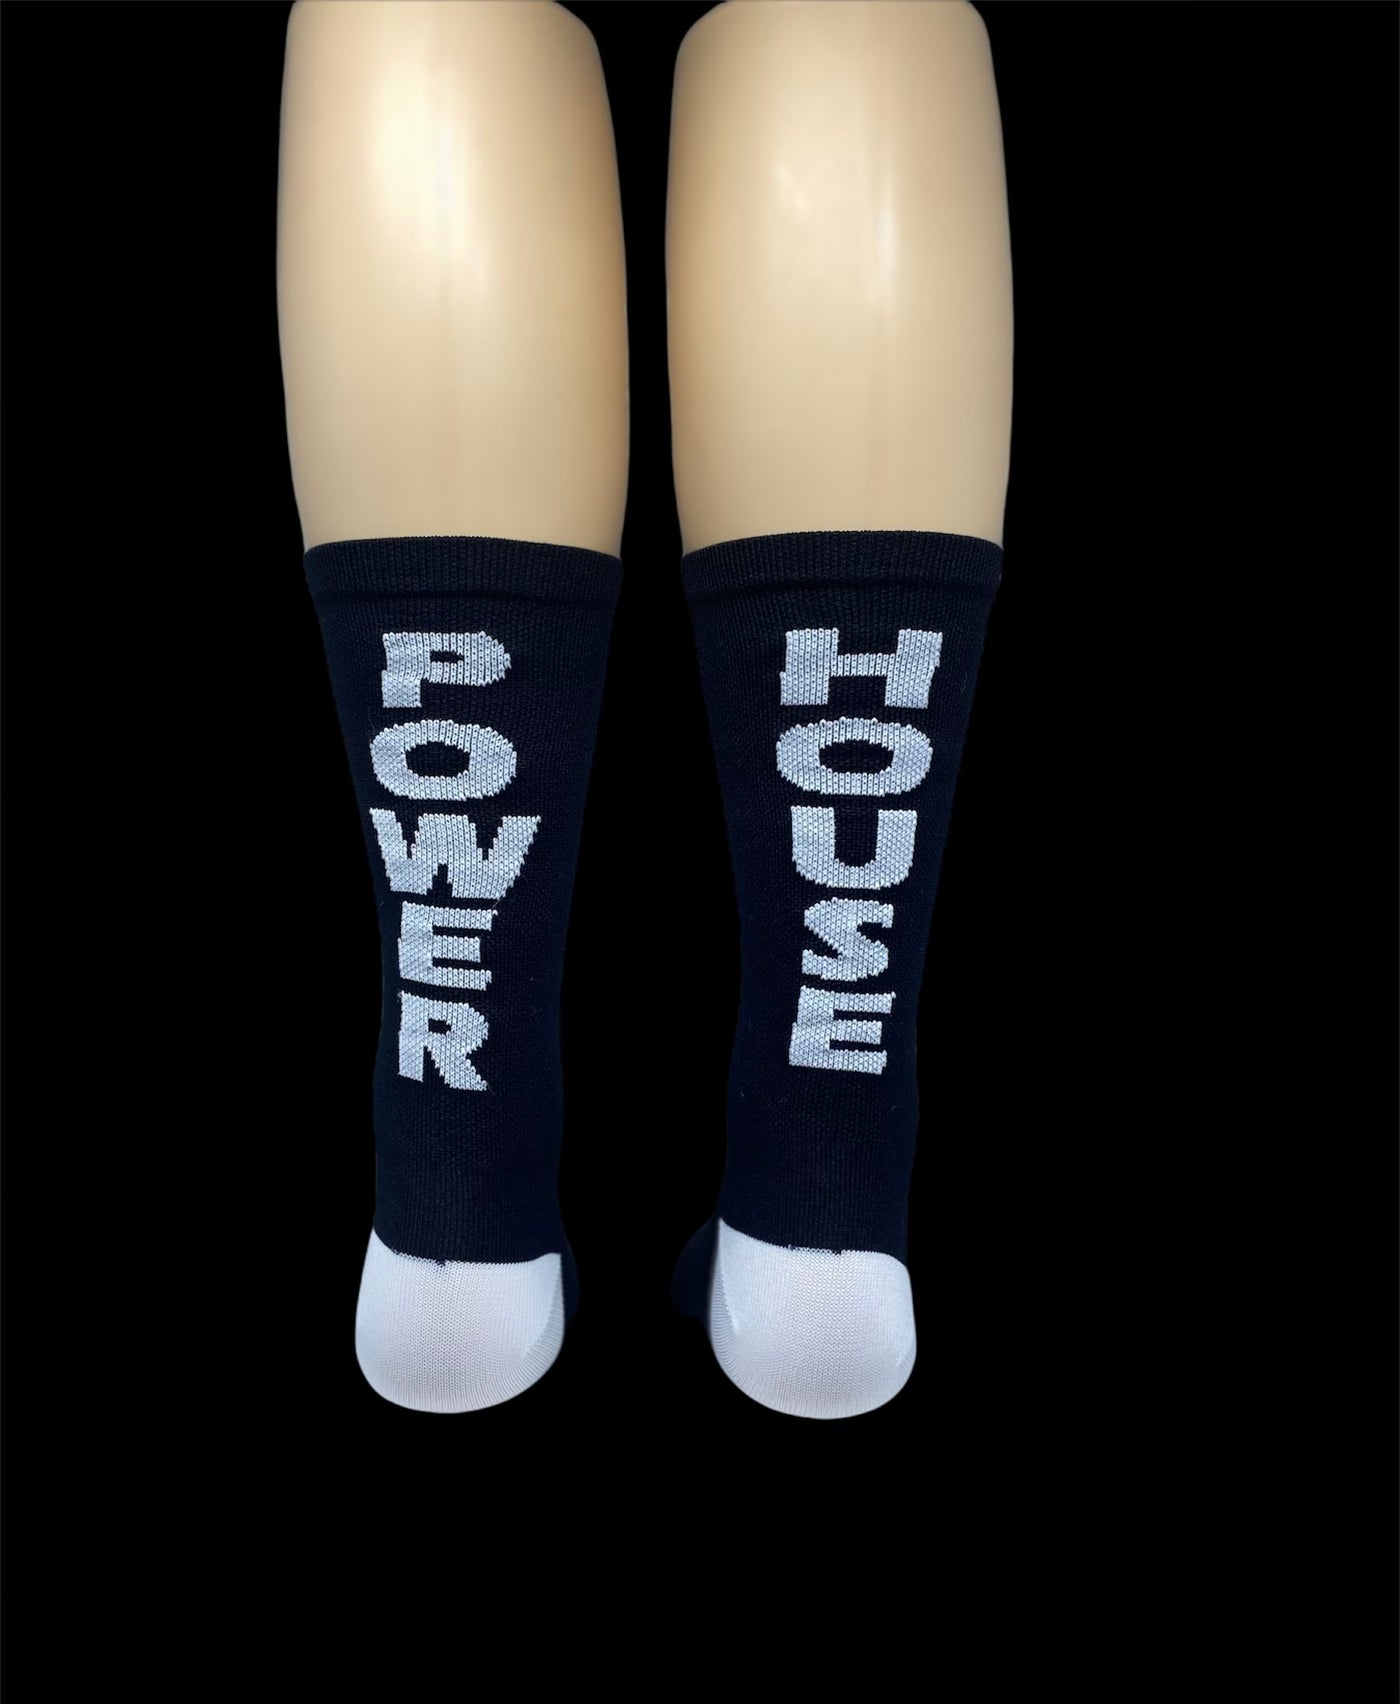 “POWER HOUSE!” Black and white 6" Men's and Women's cycling sock with compression.